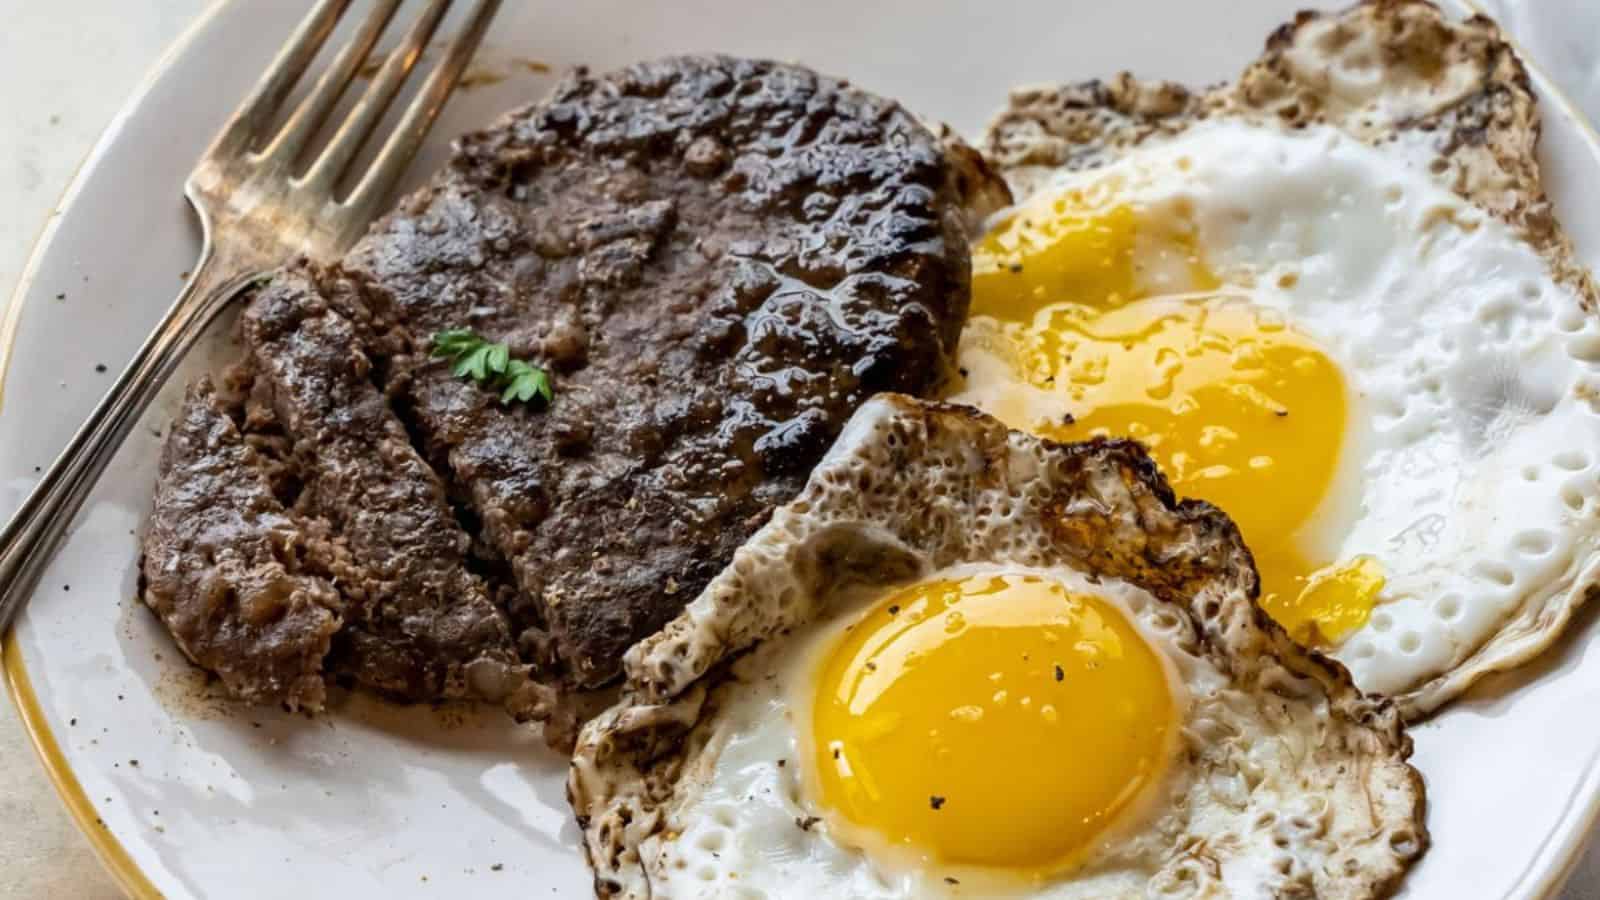 <p>Start your day with a scrumptious breakfast! Whether you’re camping in your RV or enjoying a lazy Sunday at home, cooking on your Blackstone promises deliciousness with ease!<br><strong>Get the Recipe: </strong><a href="https://laraclevenger.com/blackstone-breakfast/?utm_source=msn&utm_medium=page&utm_campaign=msn">Blackstone Breakfast</a></p>